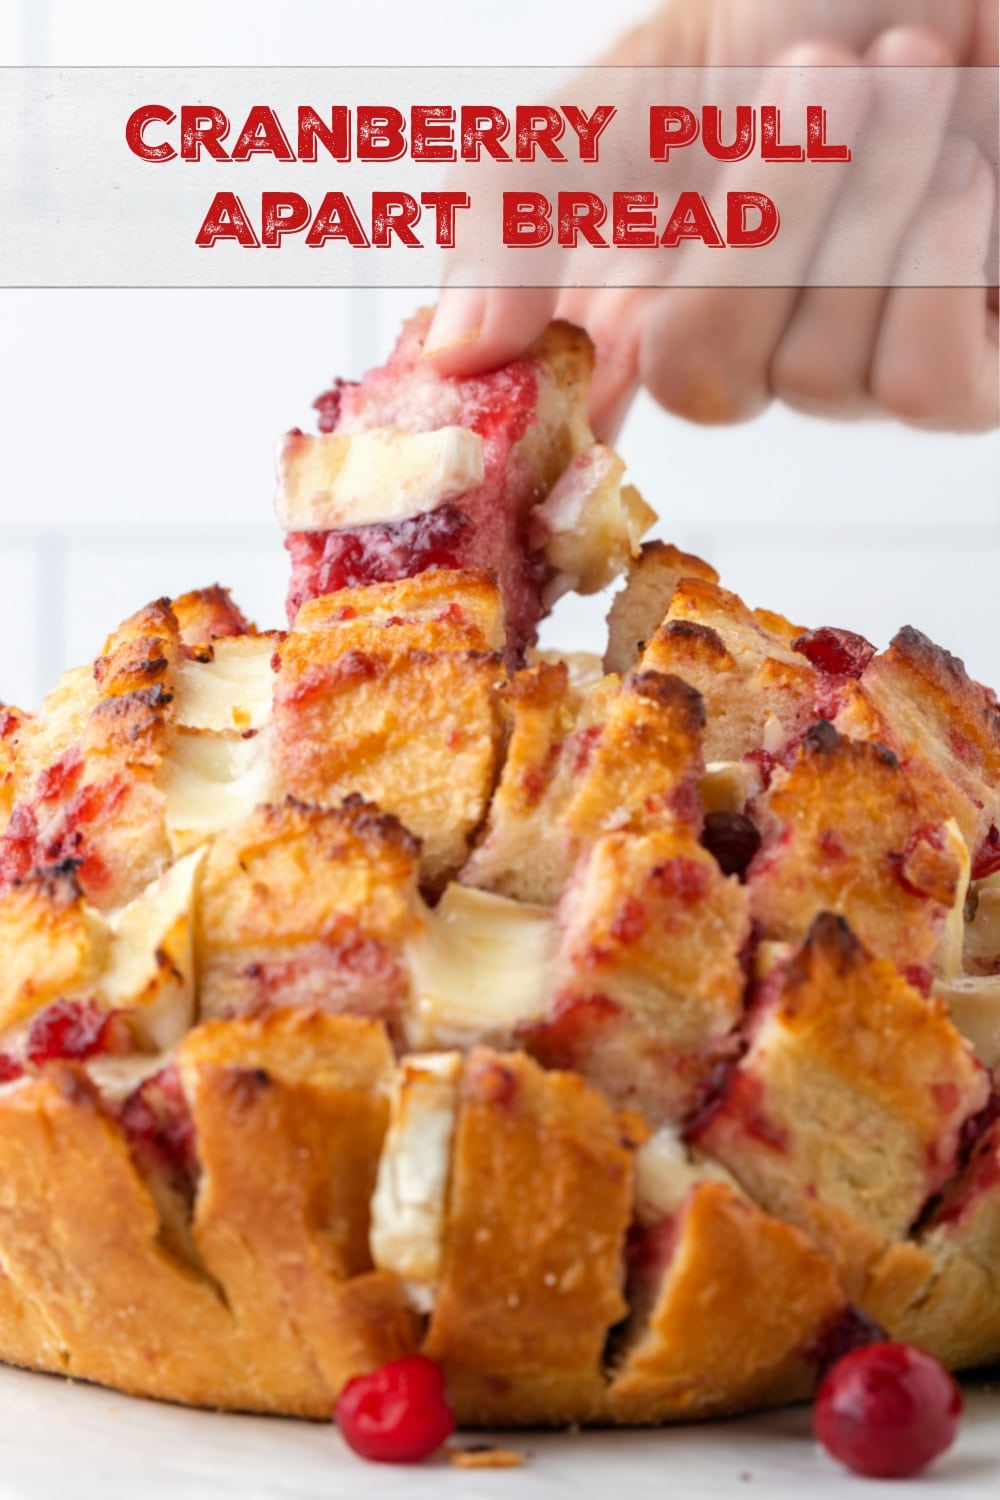 Gooey cheese and bread are always a good idea, but spoon in cranberry sauce and you instantly have a festive, fall appetizer on your hands. This Cranberry Pull-Apart Bread is guaranteed to be the hit of the party.  via @cmpollak1